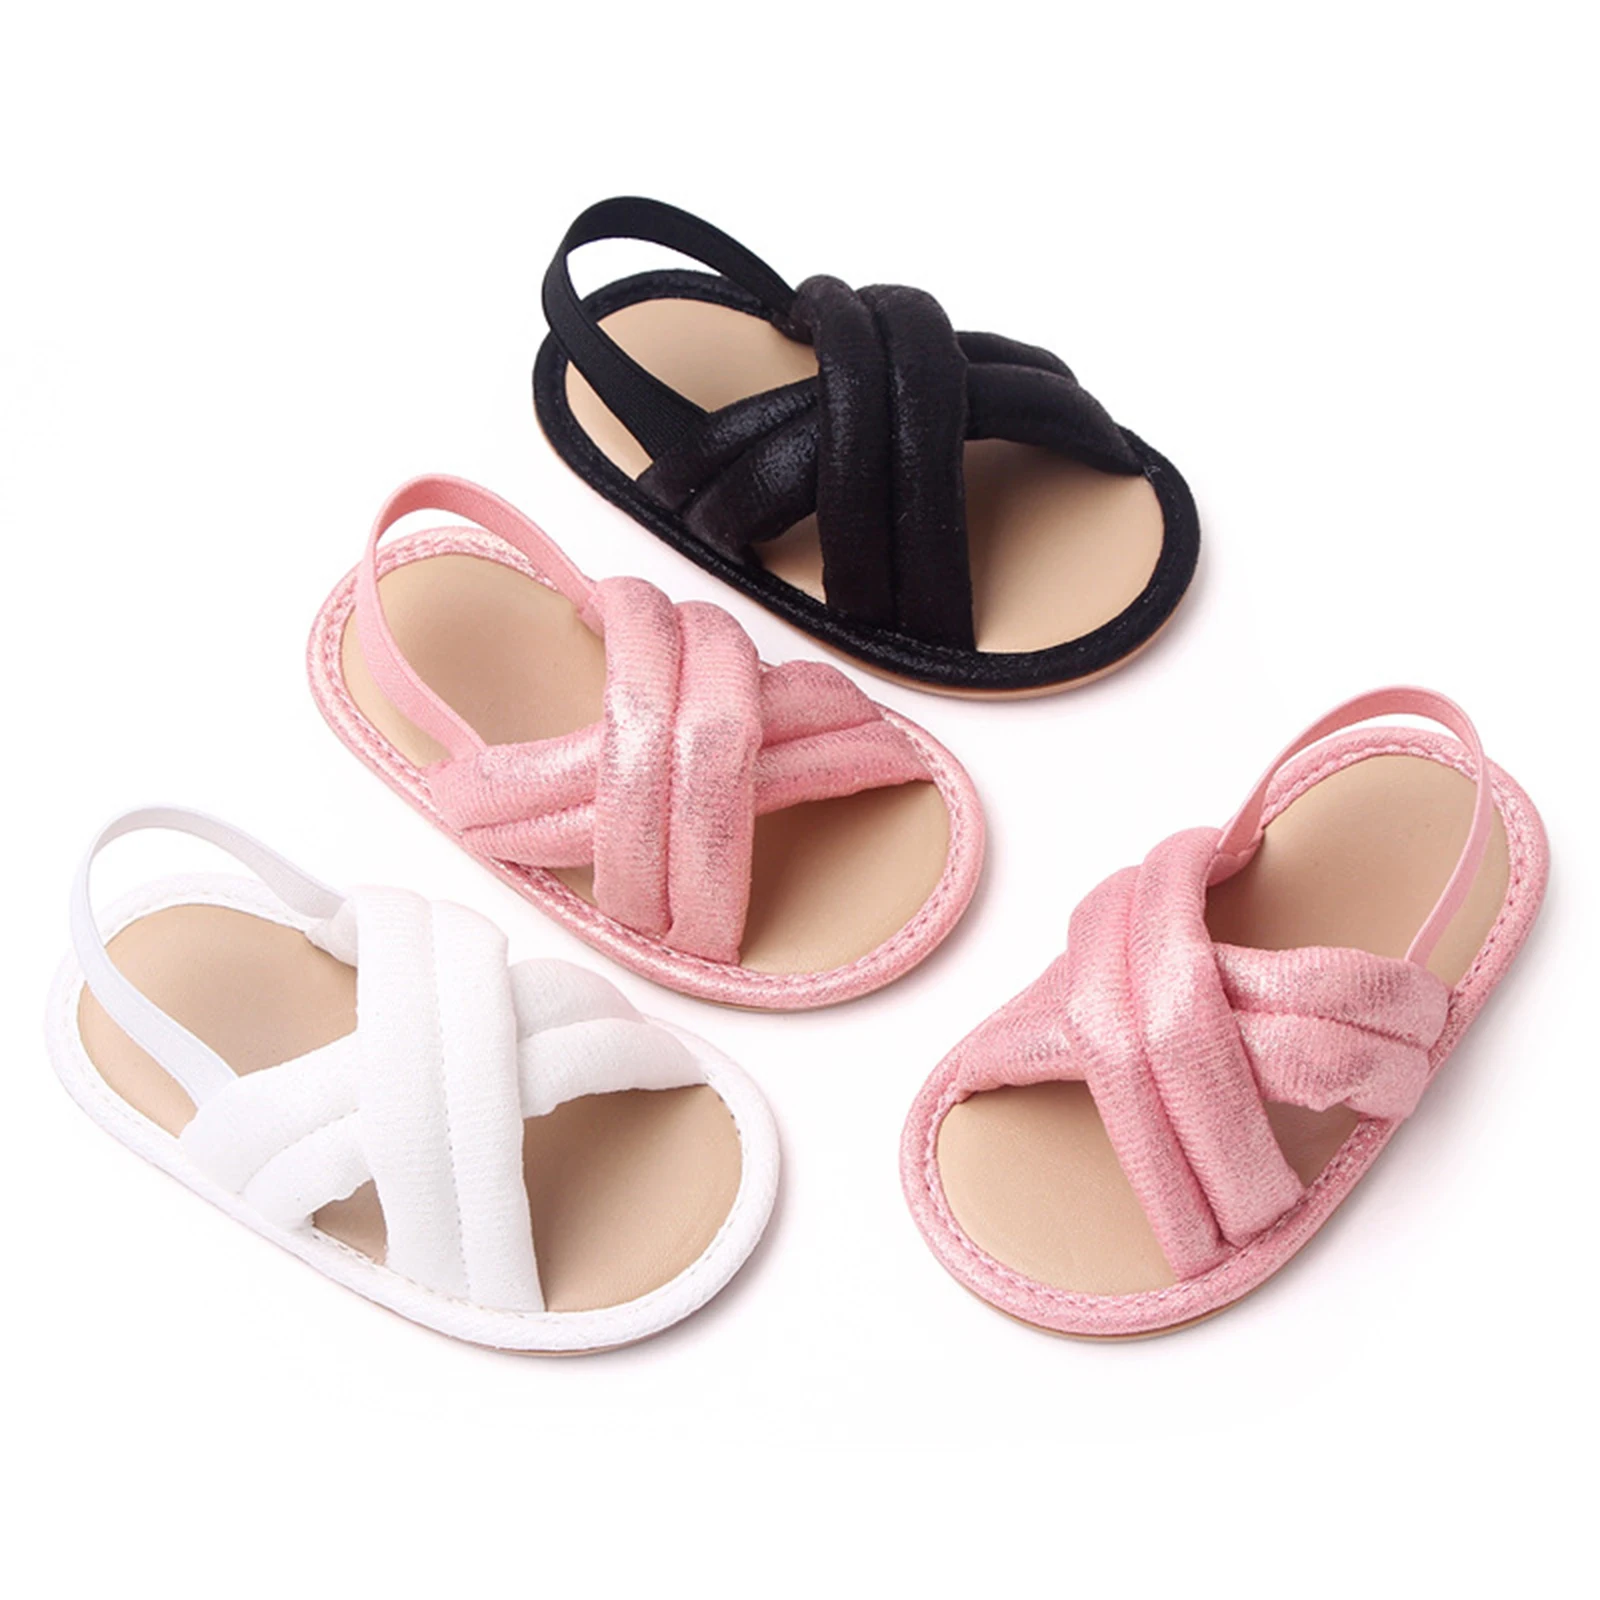 

0-12M Infant Baby Boy Girl Summer Sandals Cross Anti-slip Soft Sole Crib Prewalker Casual Shoes For Outdoor School Party